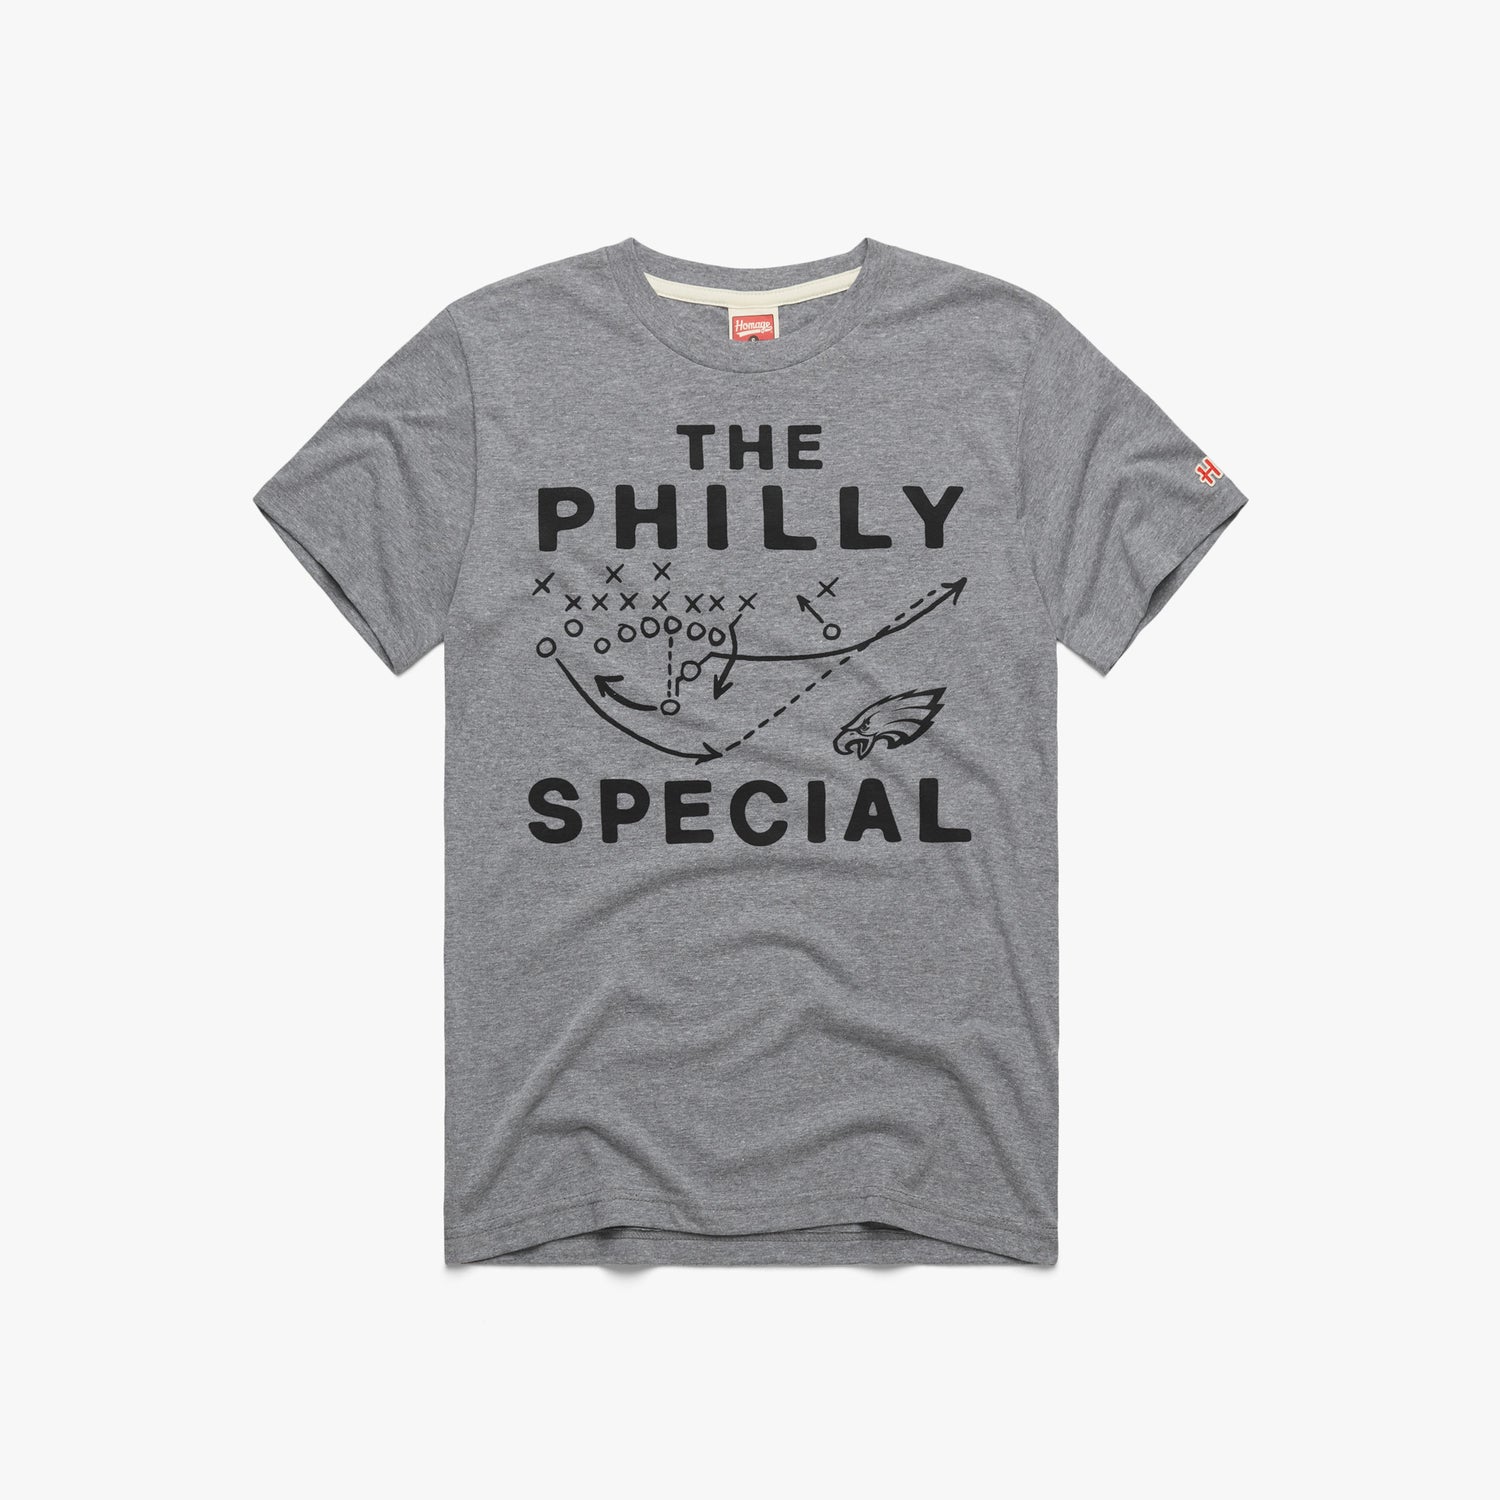 Philadelphia Eagles The Philly Special T-Shirt | Kelly Green Philadelphia Eagles Apparel from Homage. | Officially Licensed NFL Apparel from Homage